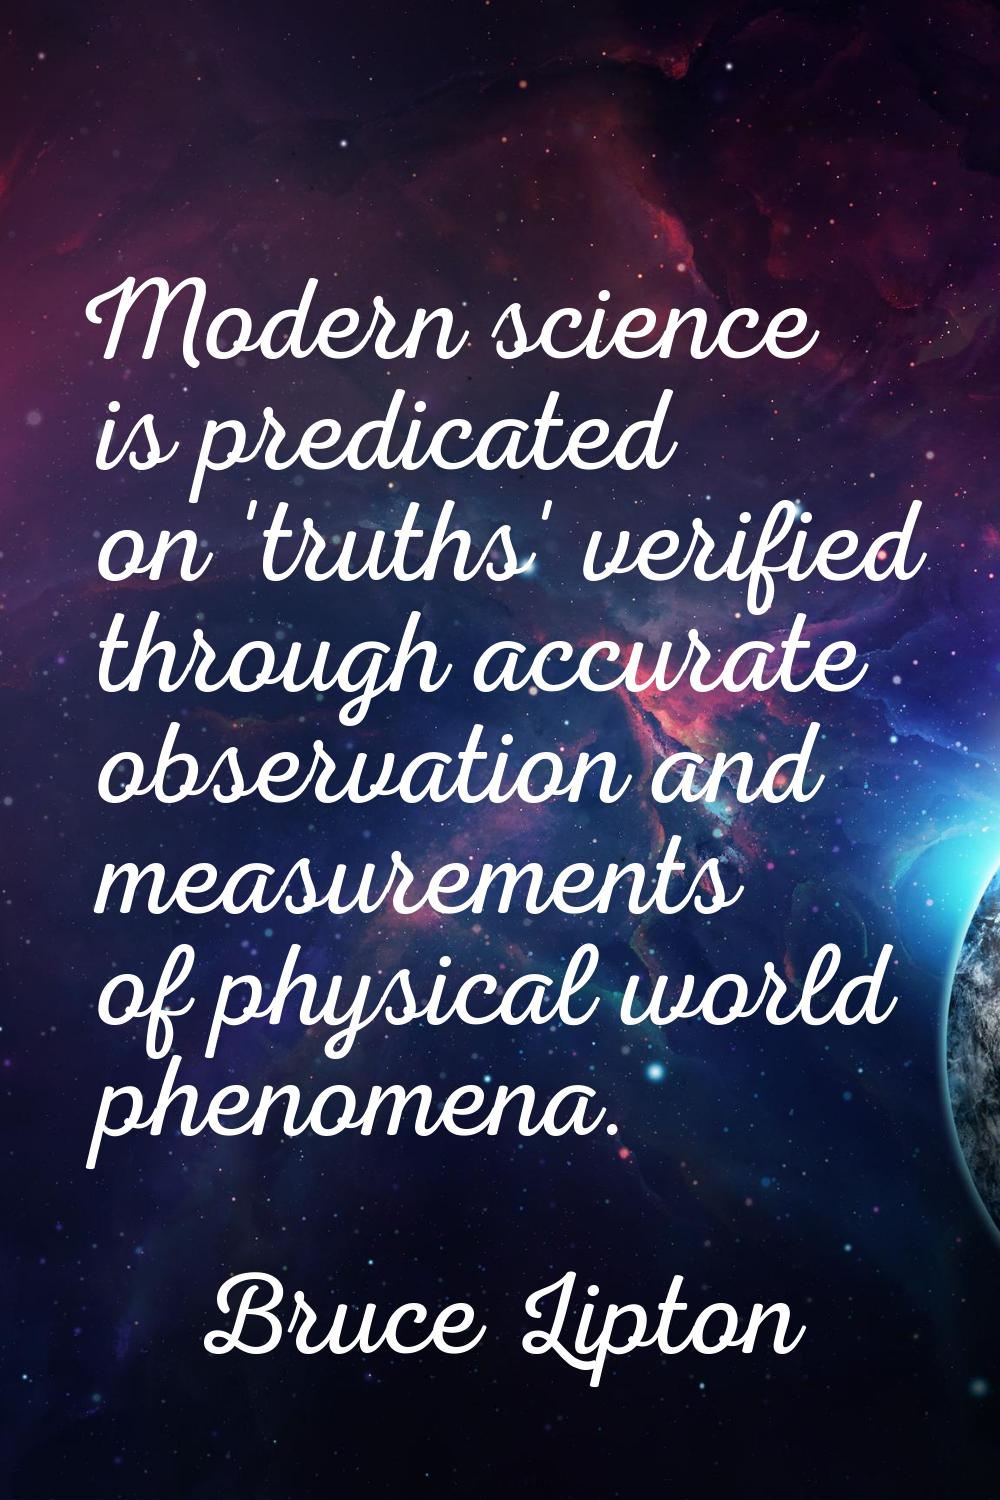 Modern science is predicated on 'truths' verified through accurate observation and measurements of 